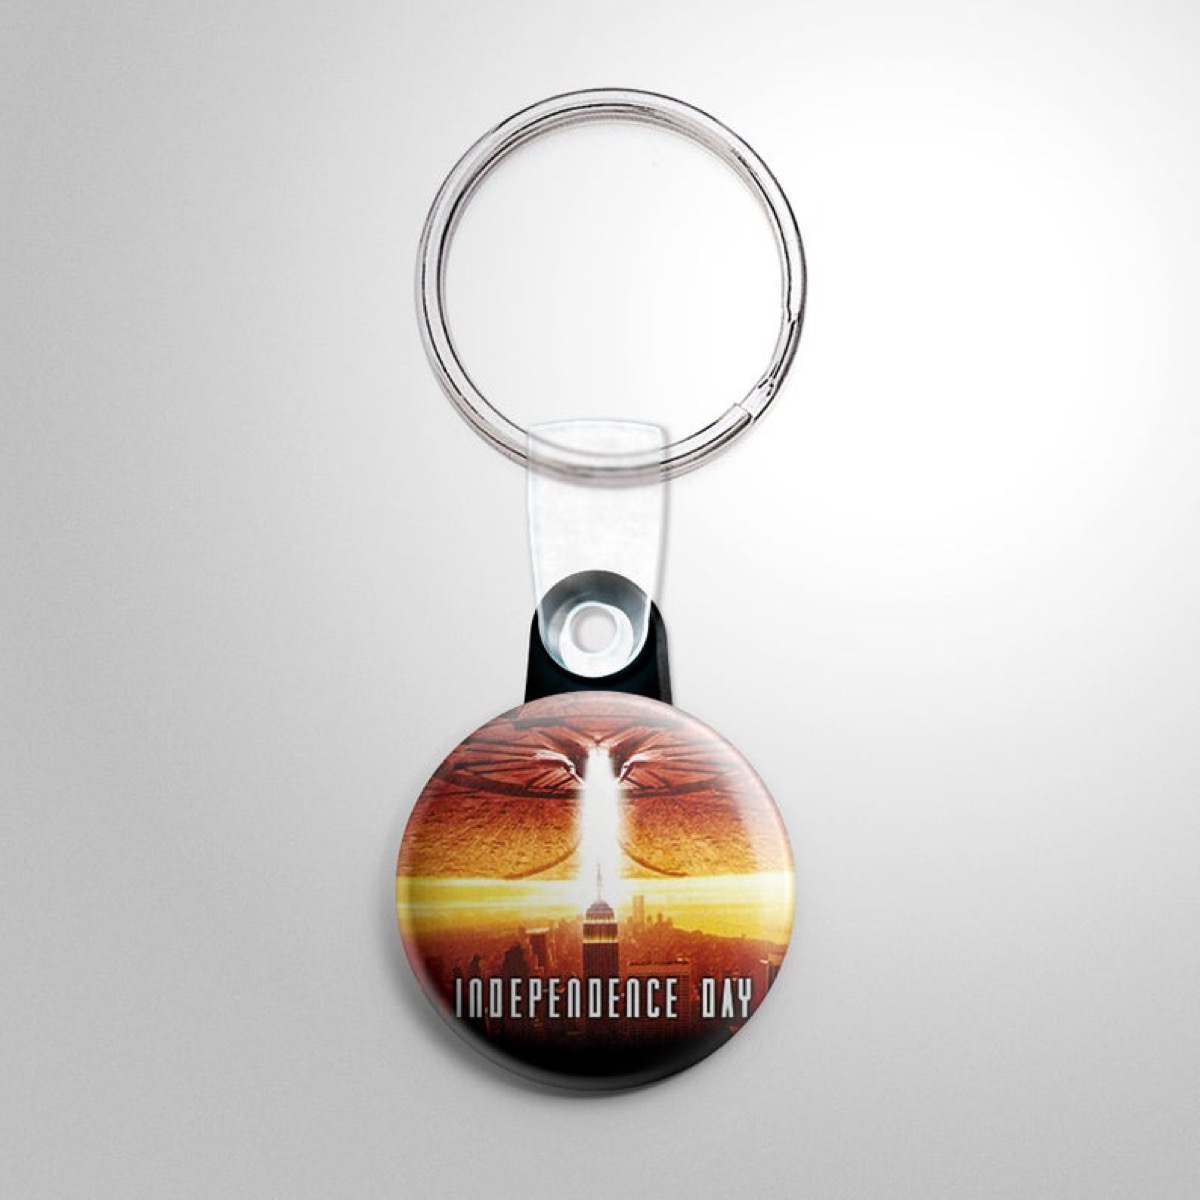 independence day keychain, july 4th keychain, independence day gifts